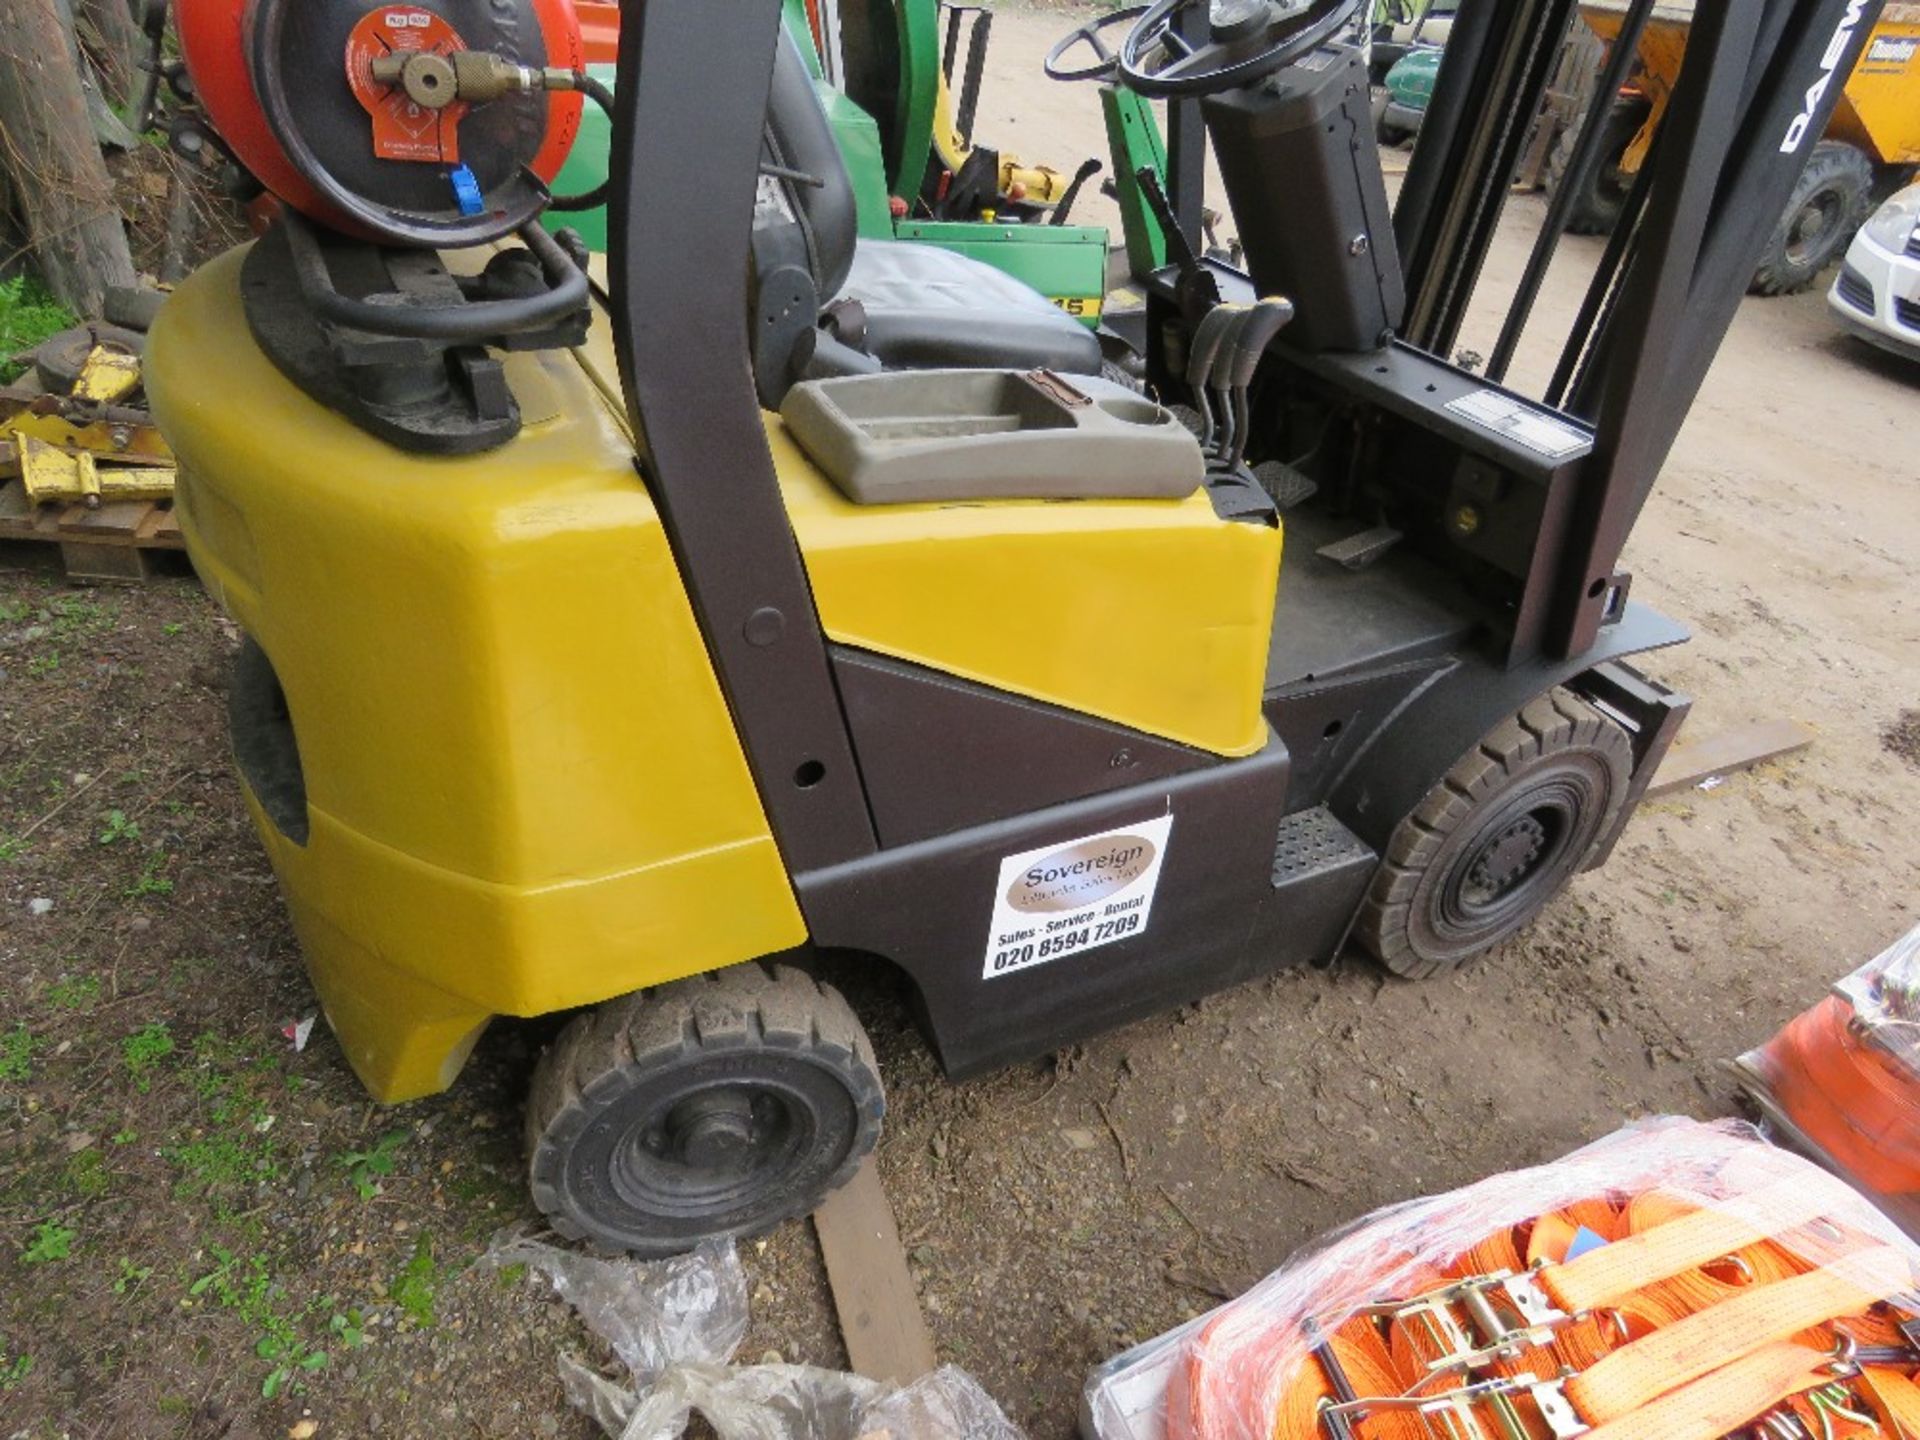 DAEWOO G18S-2 GAS POWERED FORKLIFT TRUCK WITH SIDE SHIFT. 1.8TONNE LIFT CAPACITY. 8136 REC HOURS. YE - Image 7 of 12